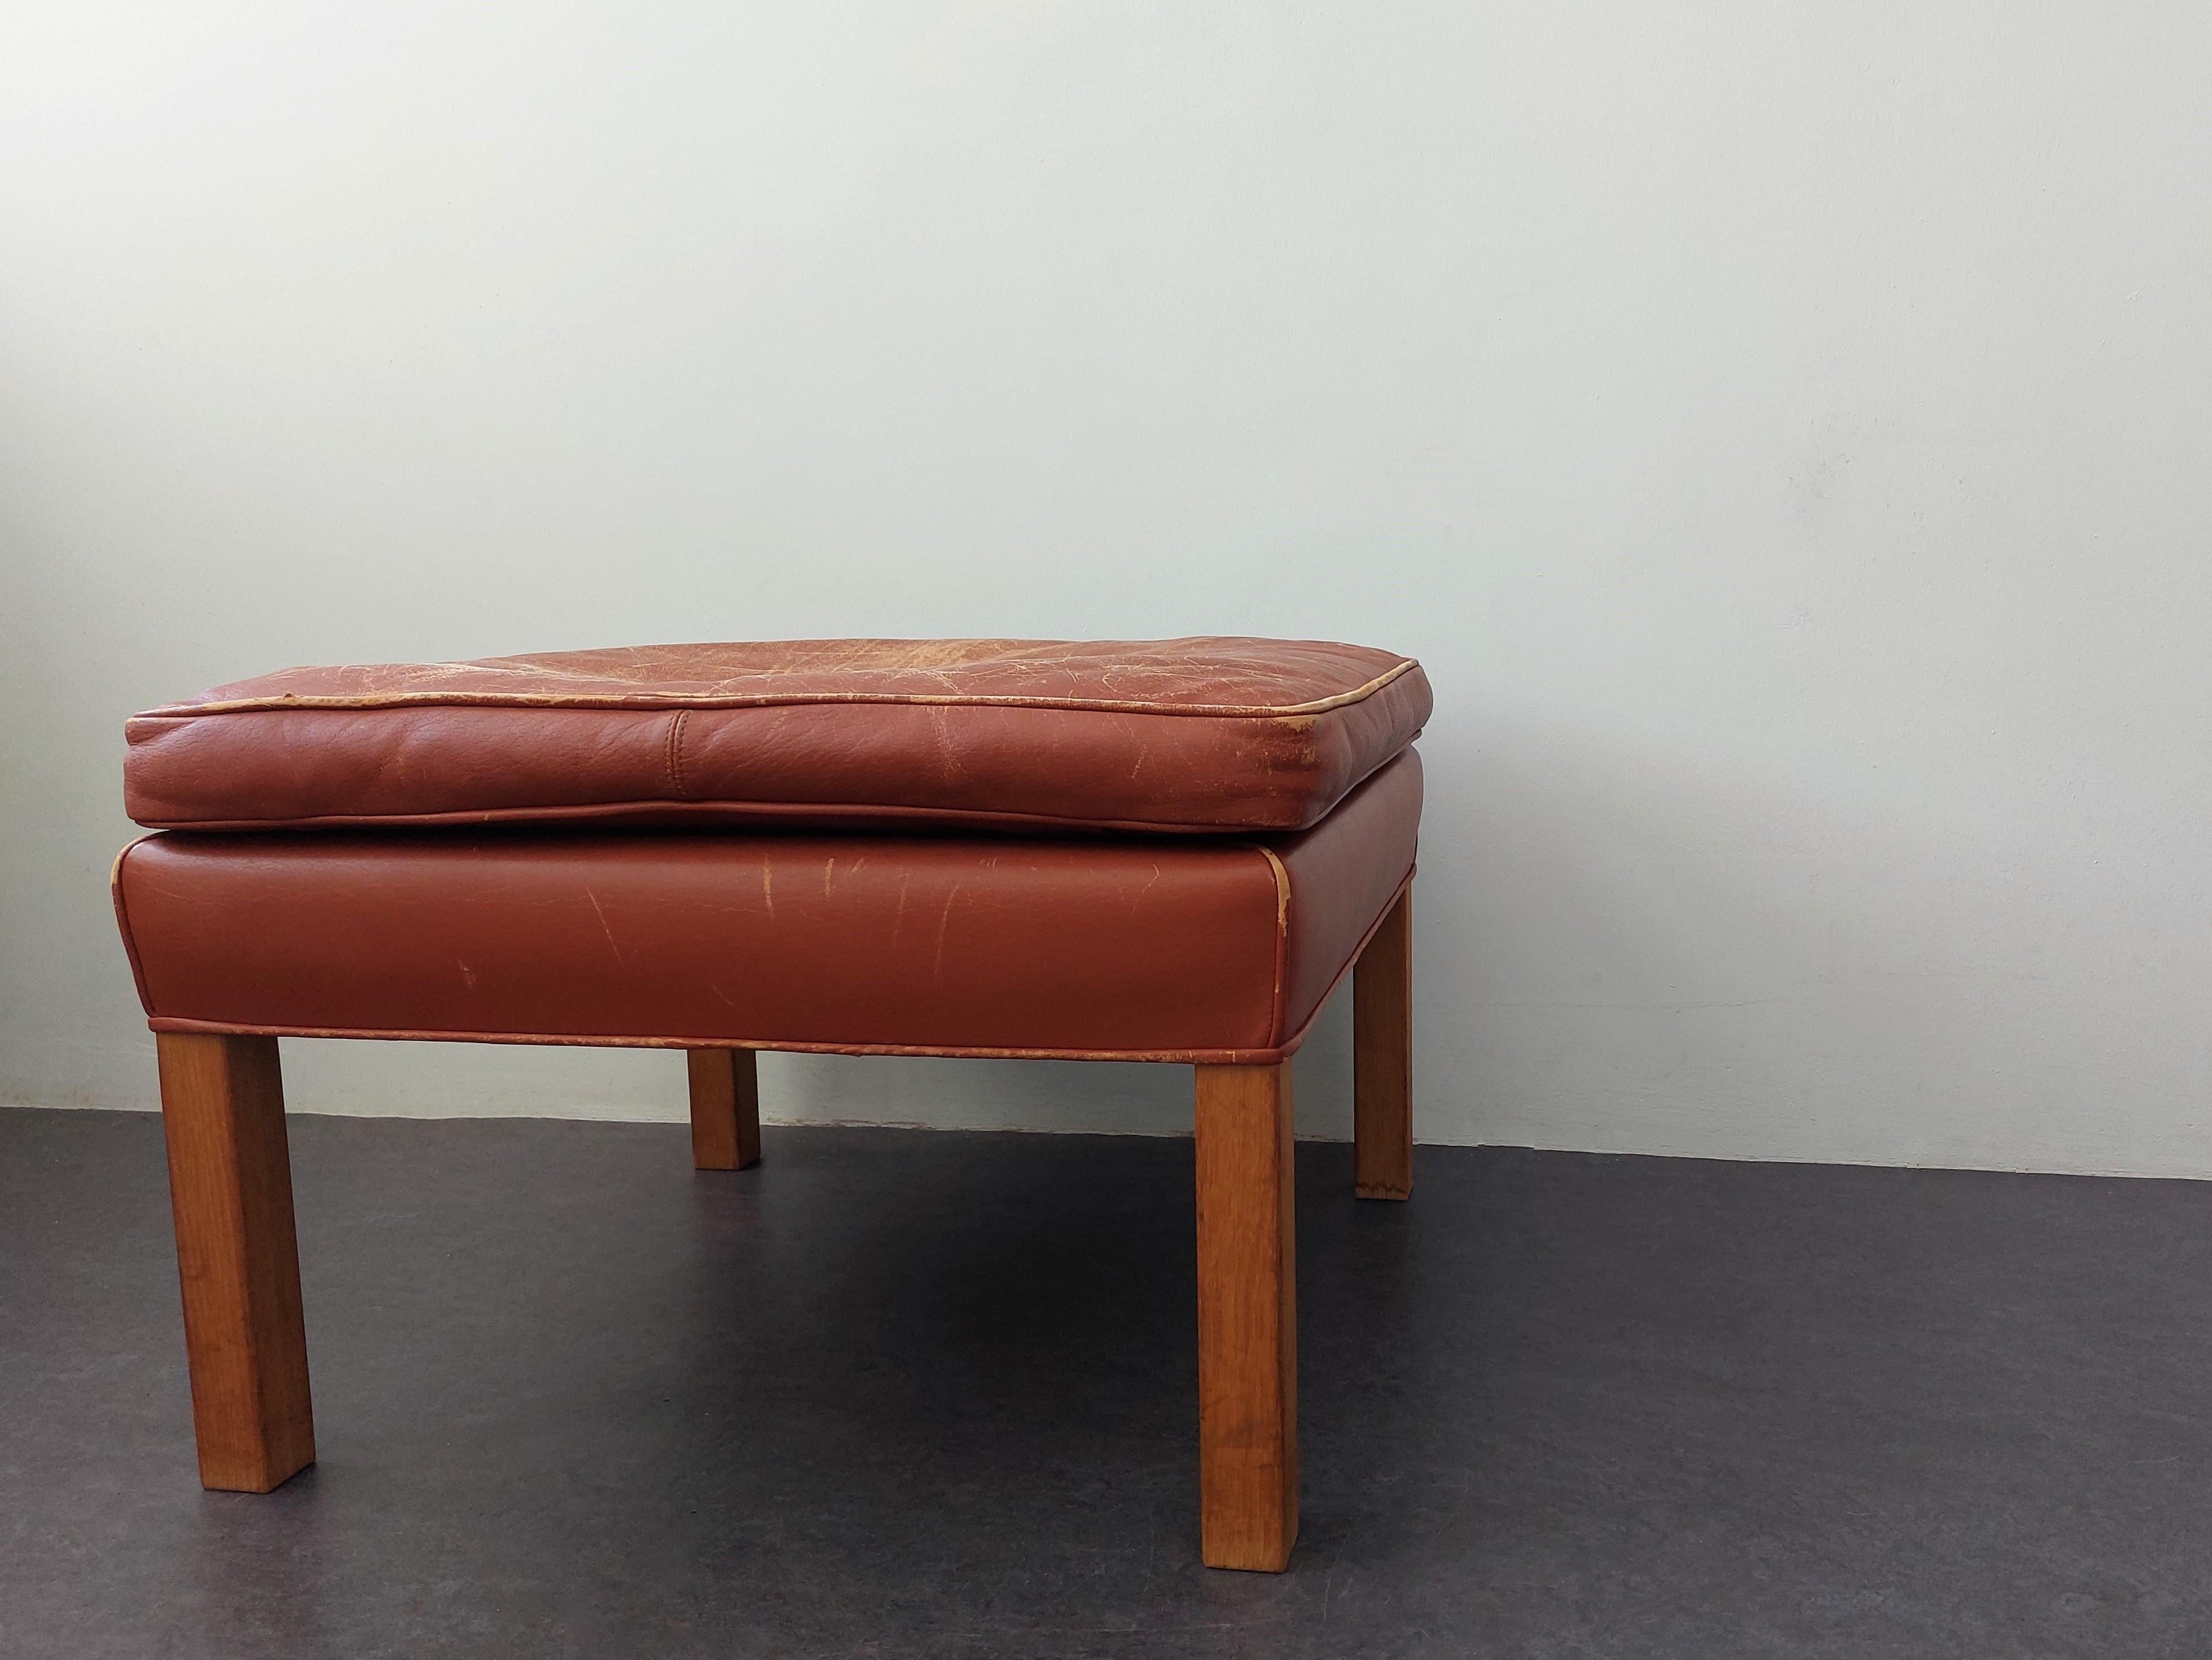 Leather Brown leather ottoman by Børge Mogensen for Fredericia, Denmark 1963